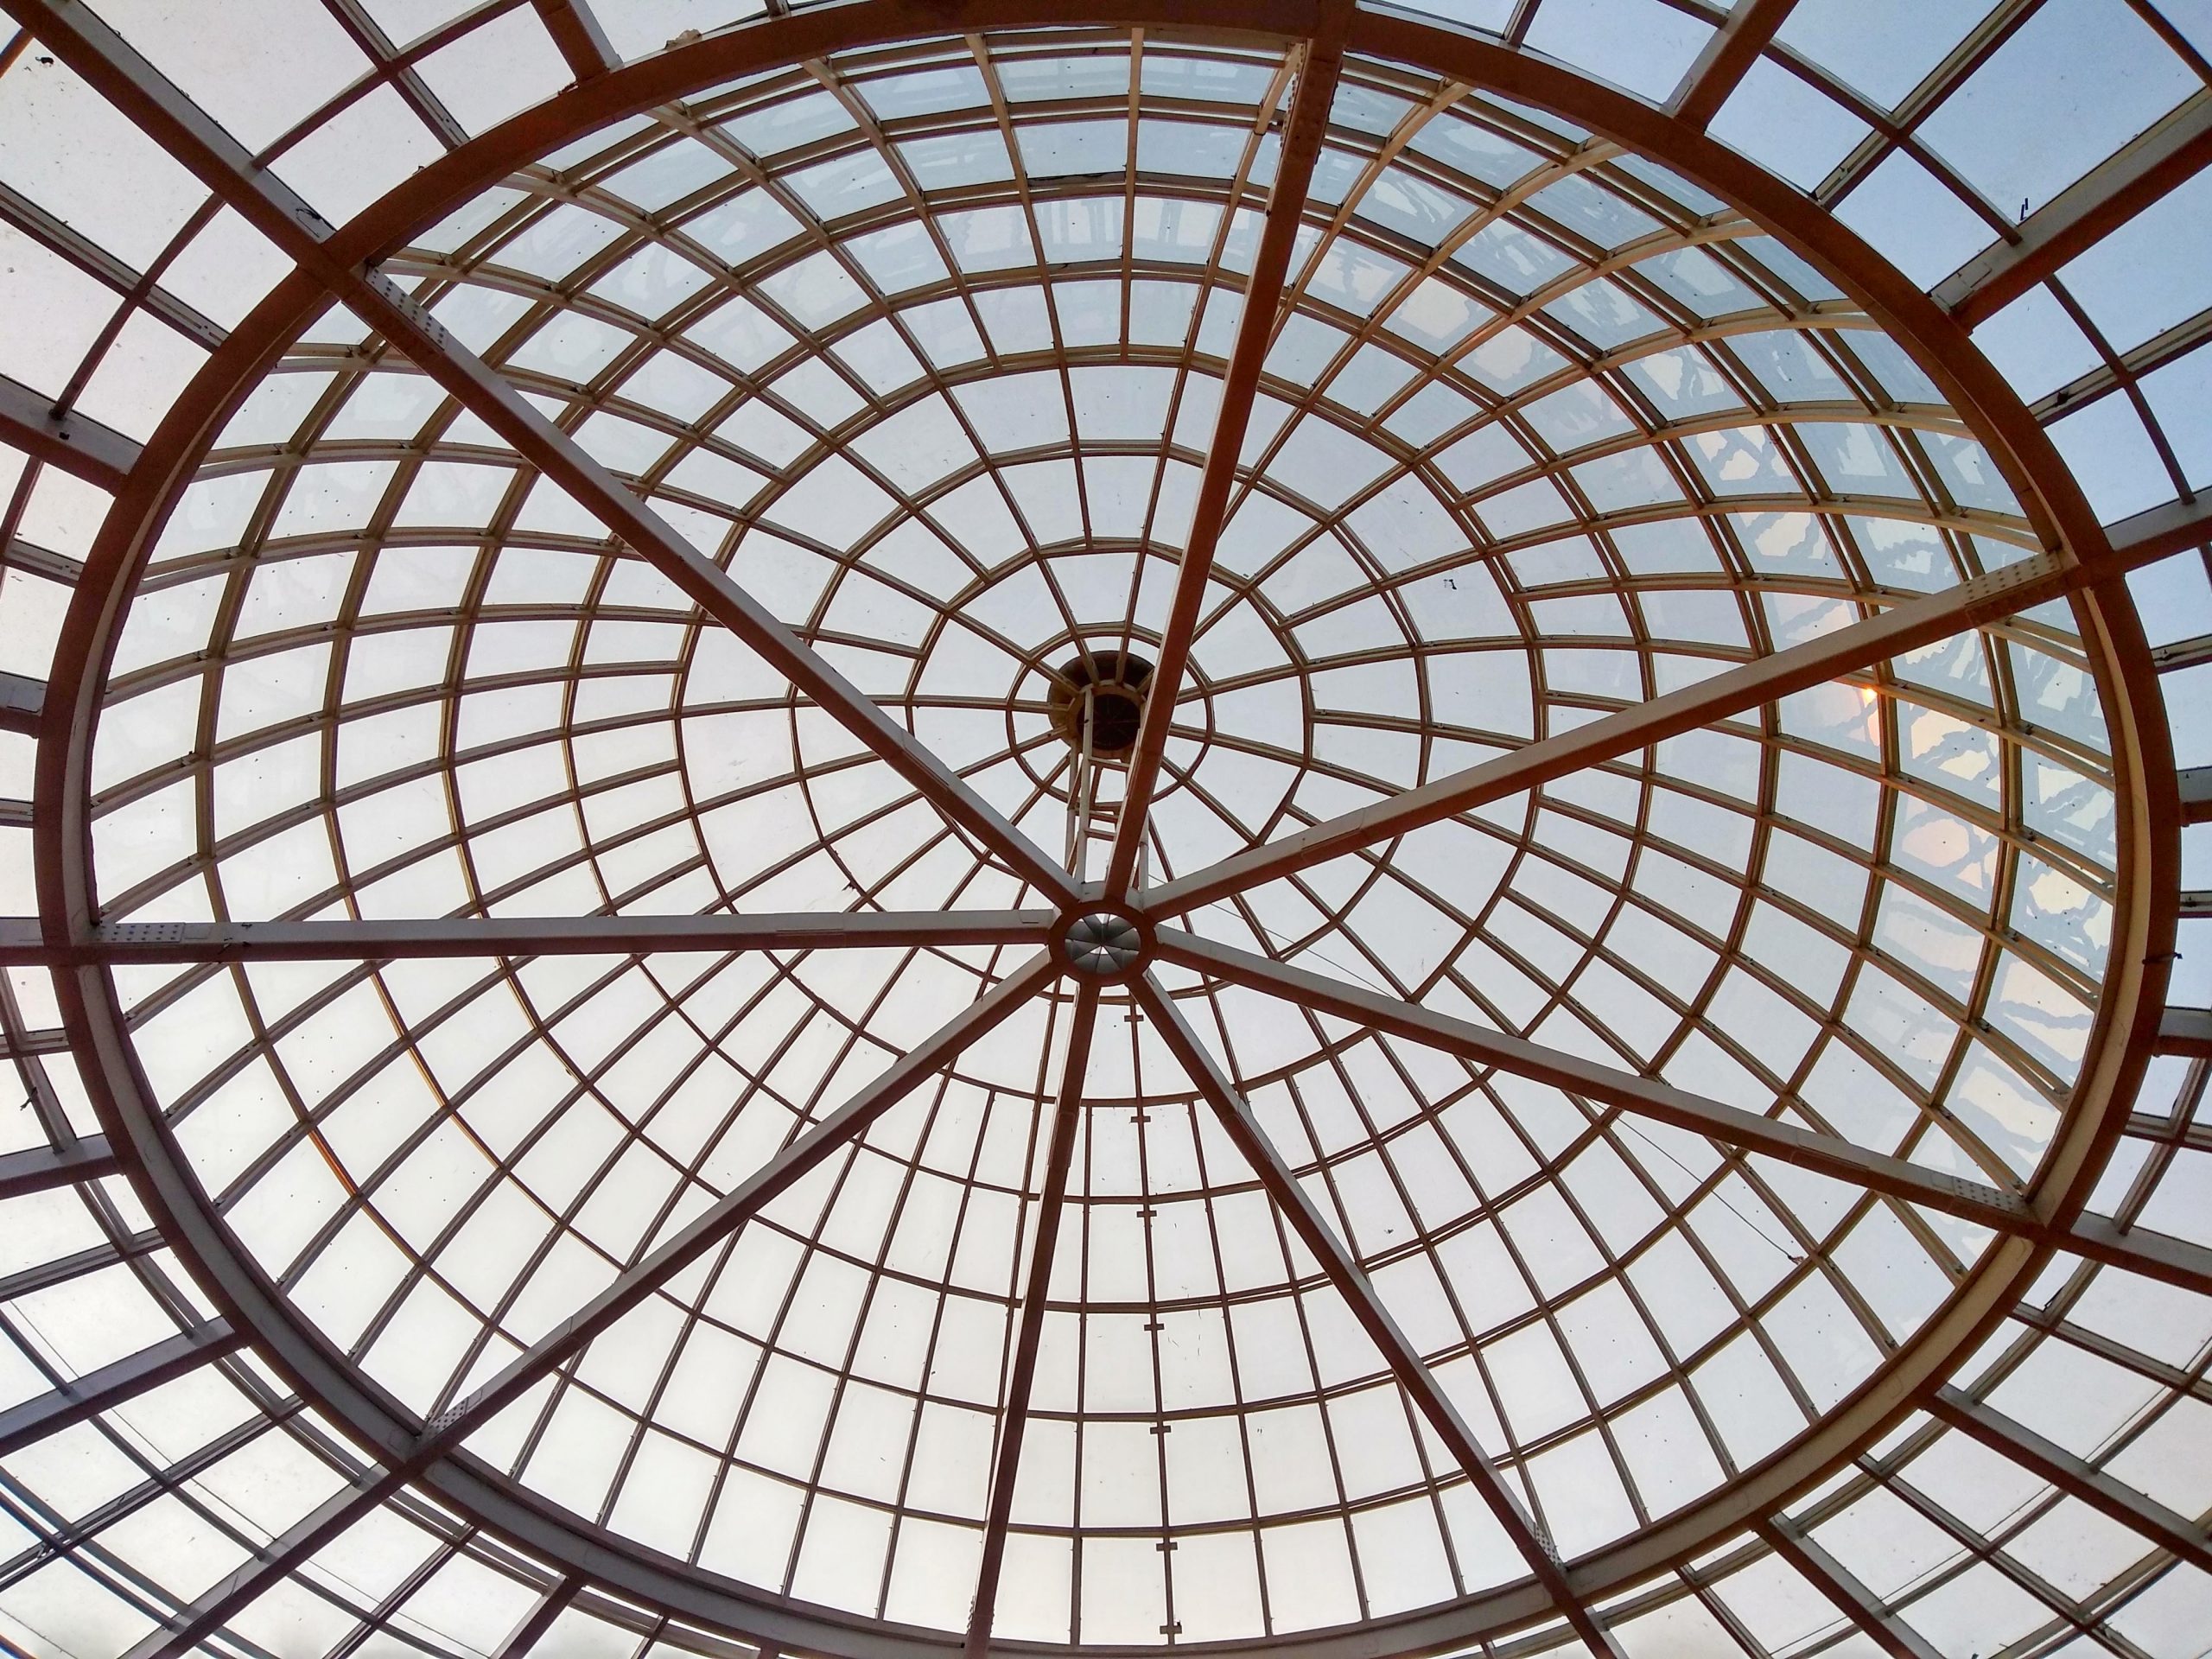 Interior view of a dome structure